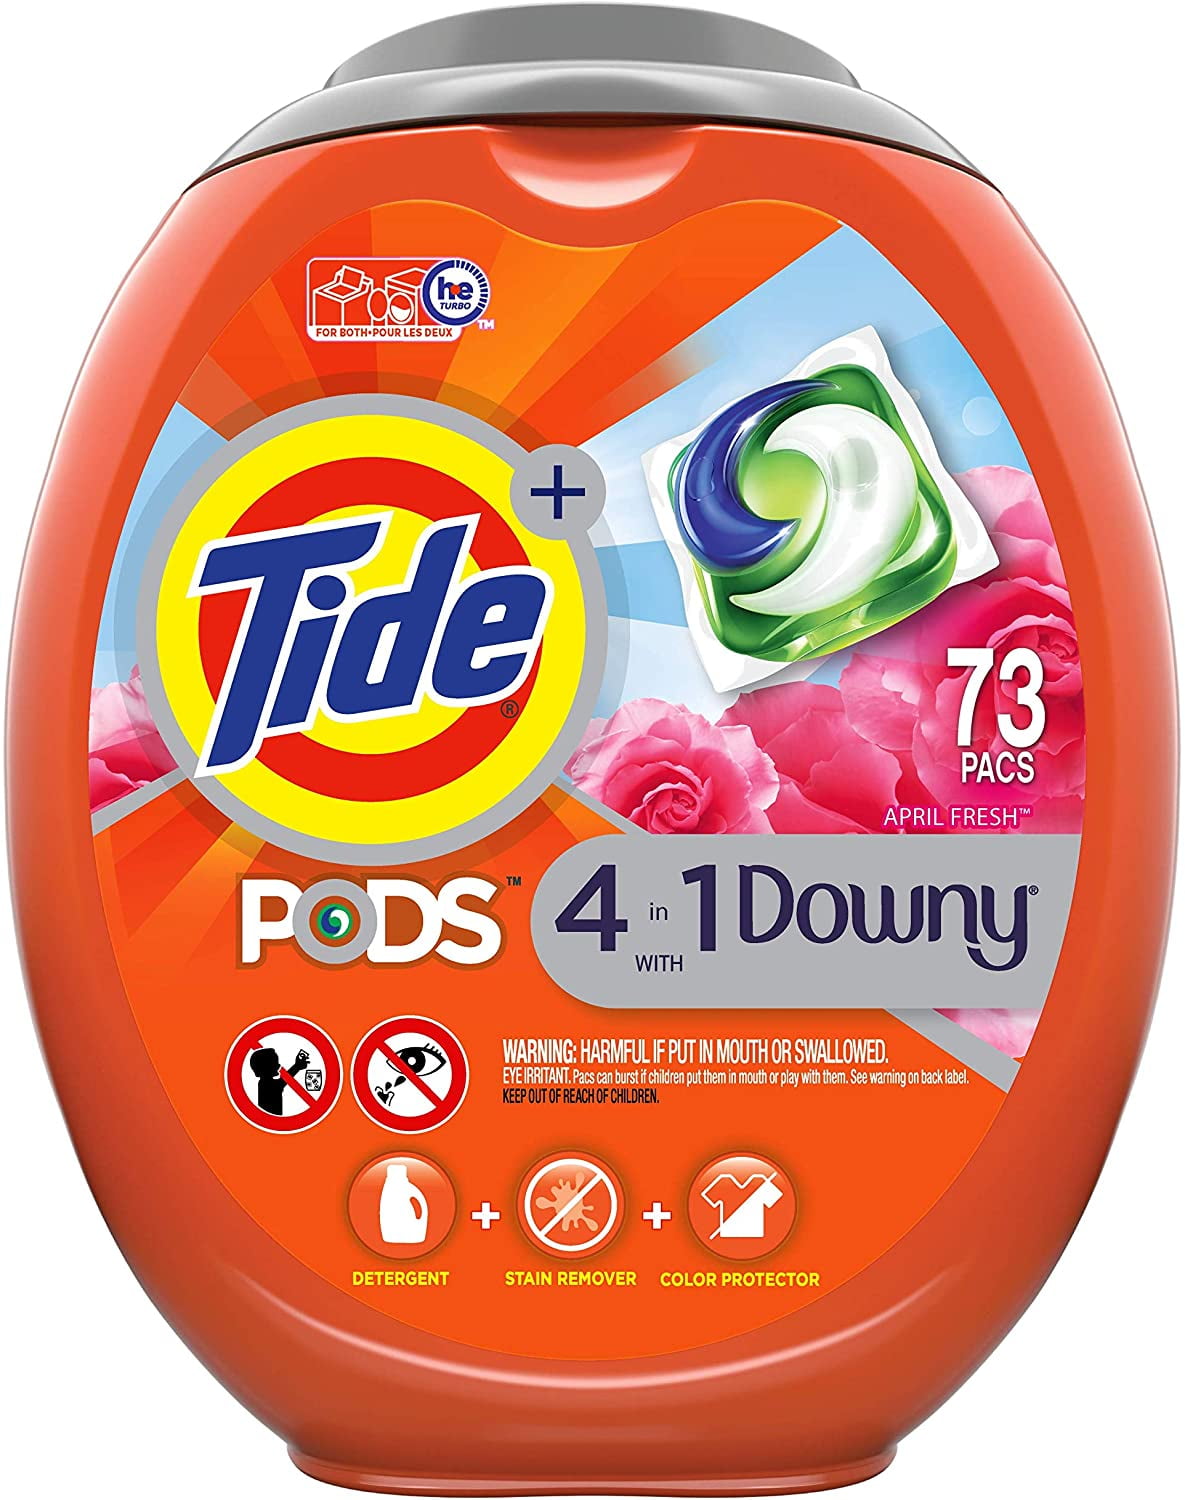 Tide PODS 4 in 1 with Downy, Laundry Detergent Soap PODS, High